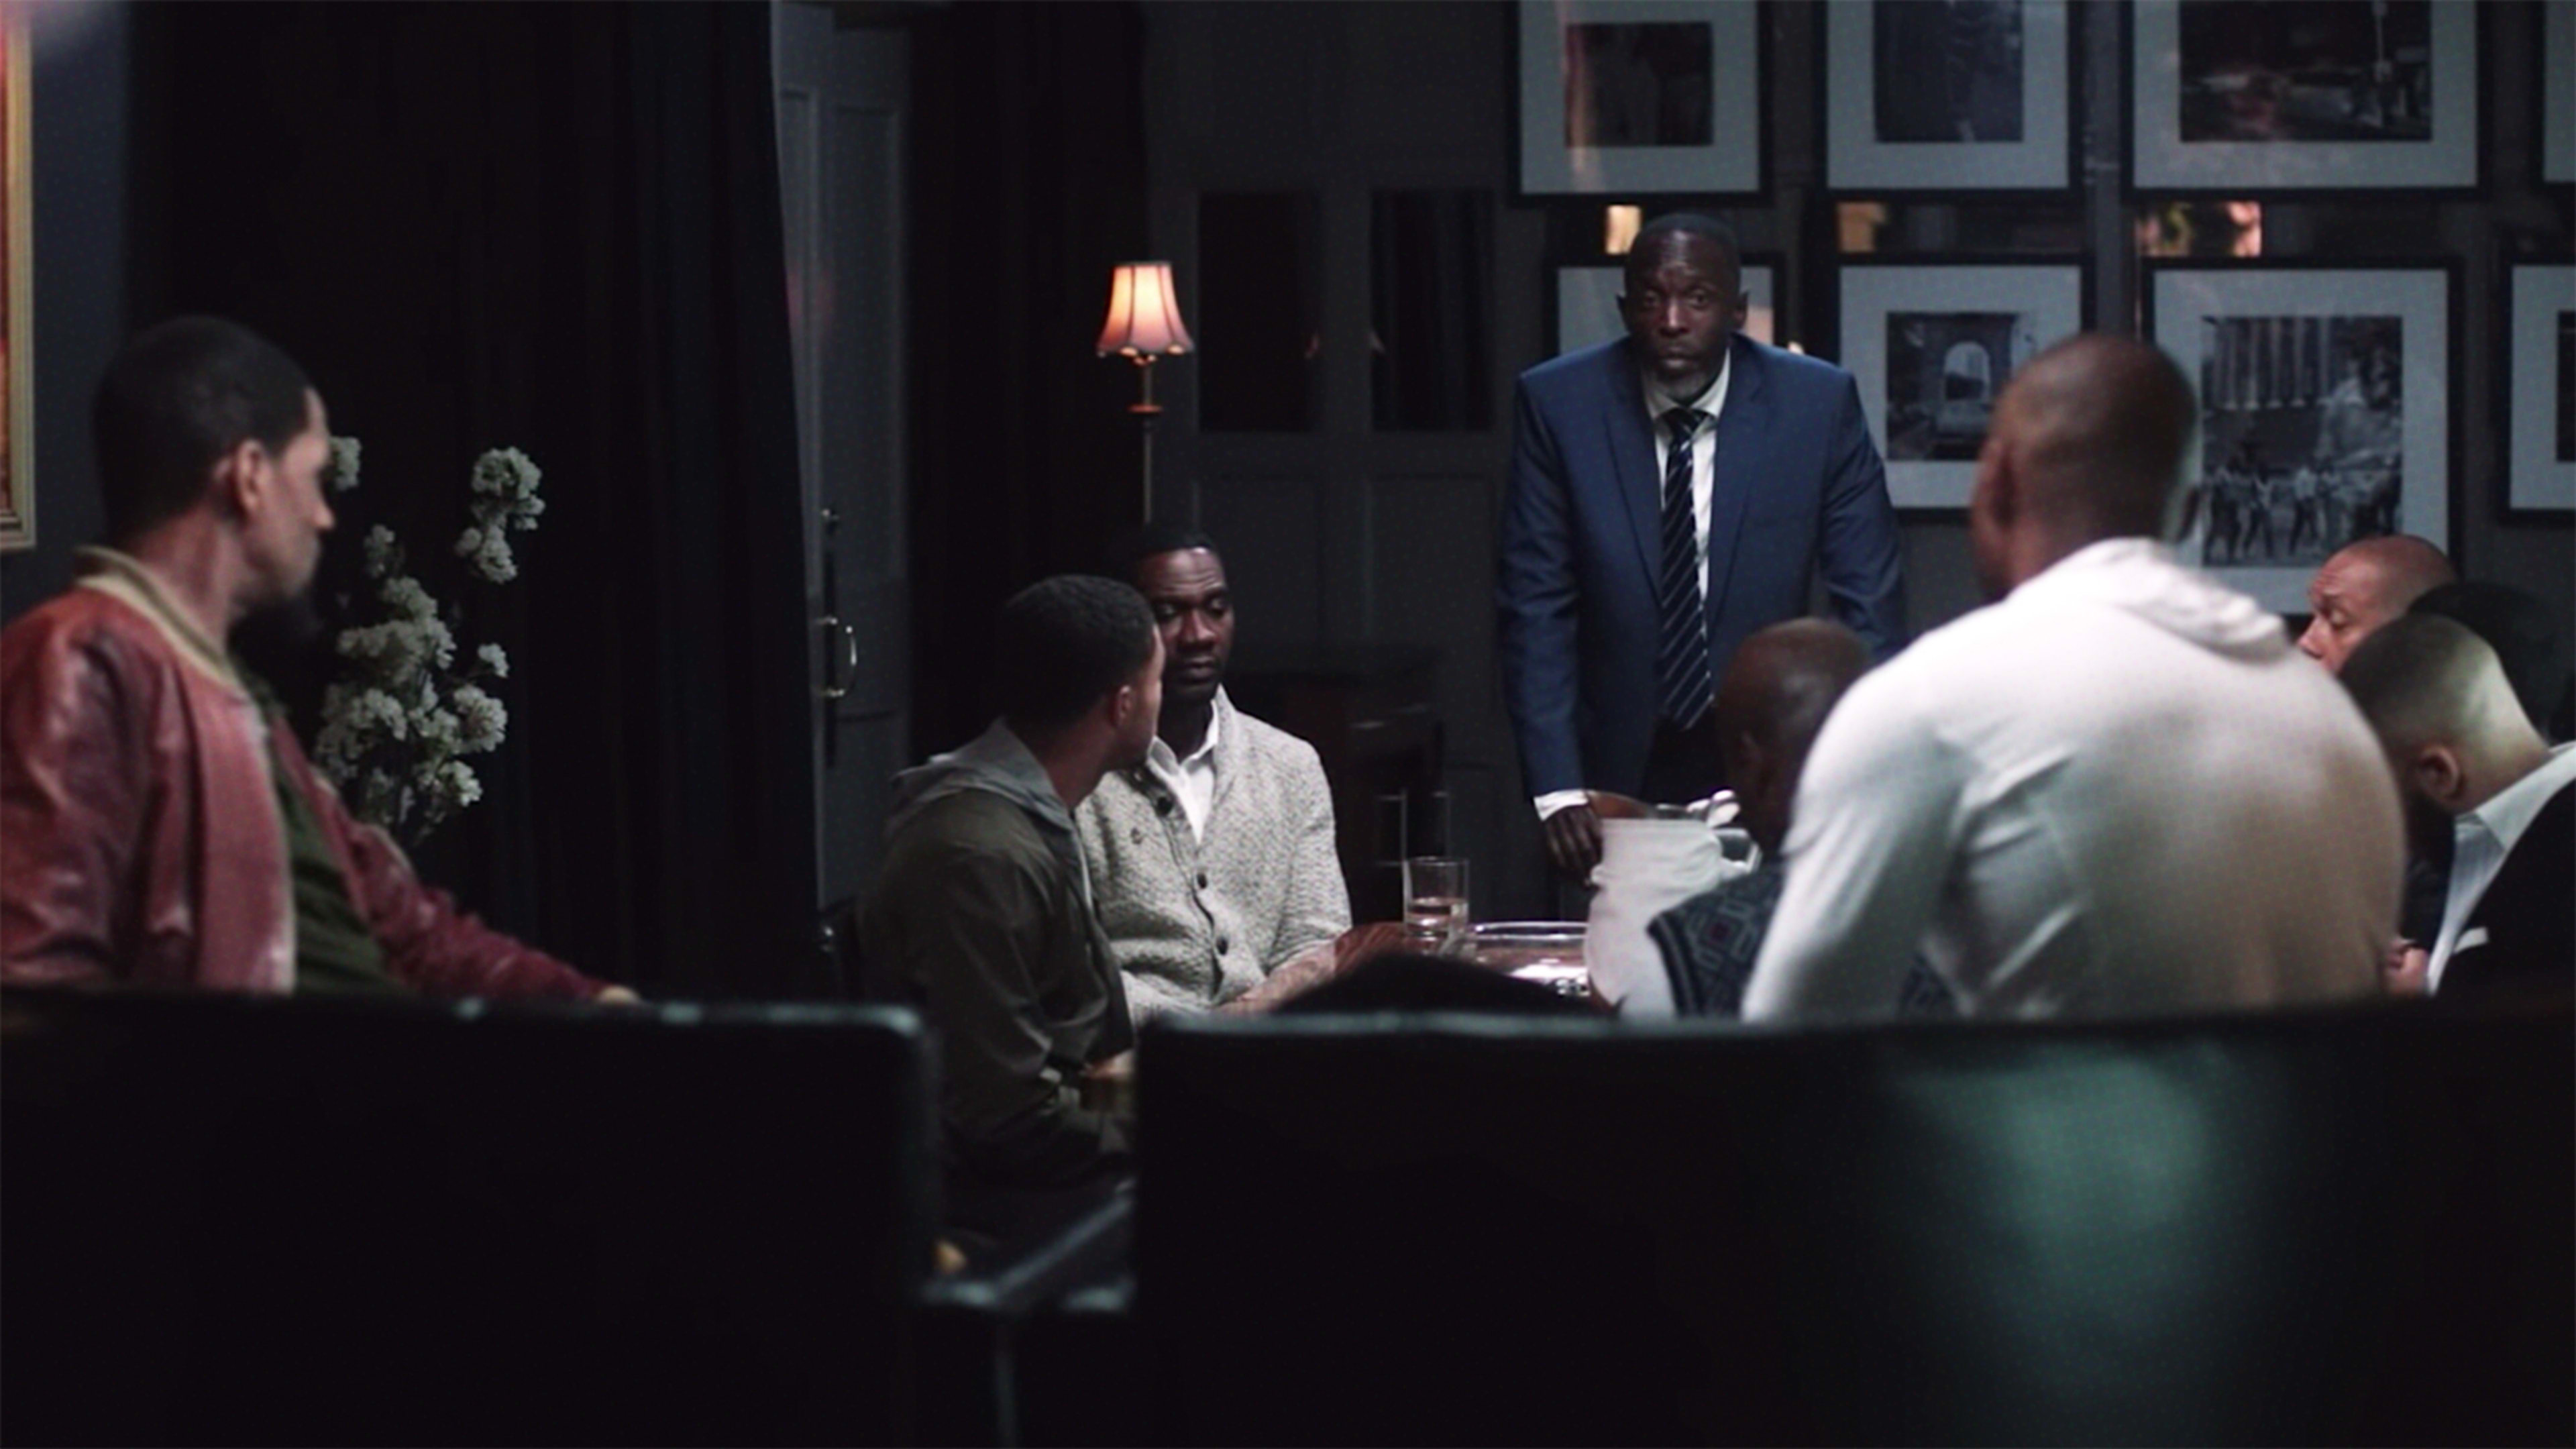 Watch Michael K. Williams debate Black Lives Matter in the acclaimed short ‘About the People’